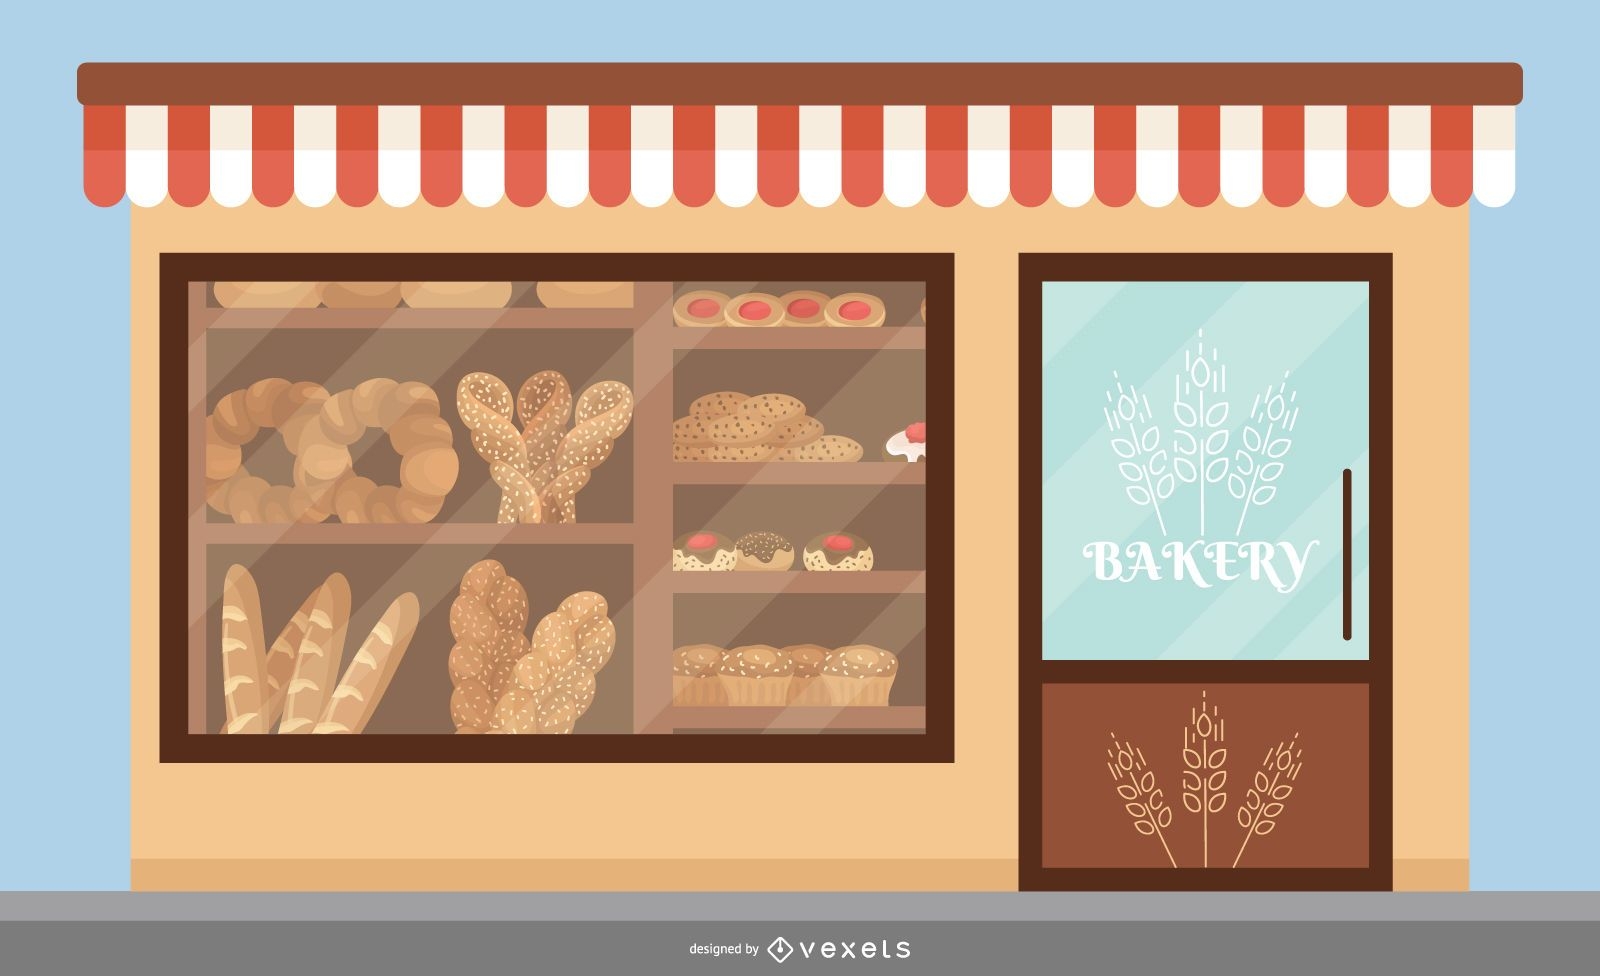 Bakery Front Store Flat Design Graphic